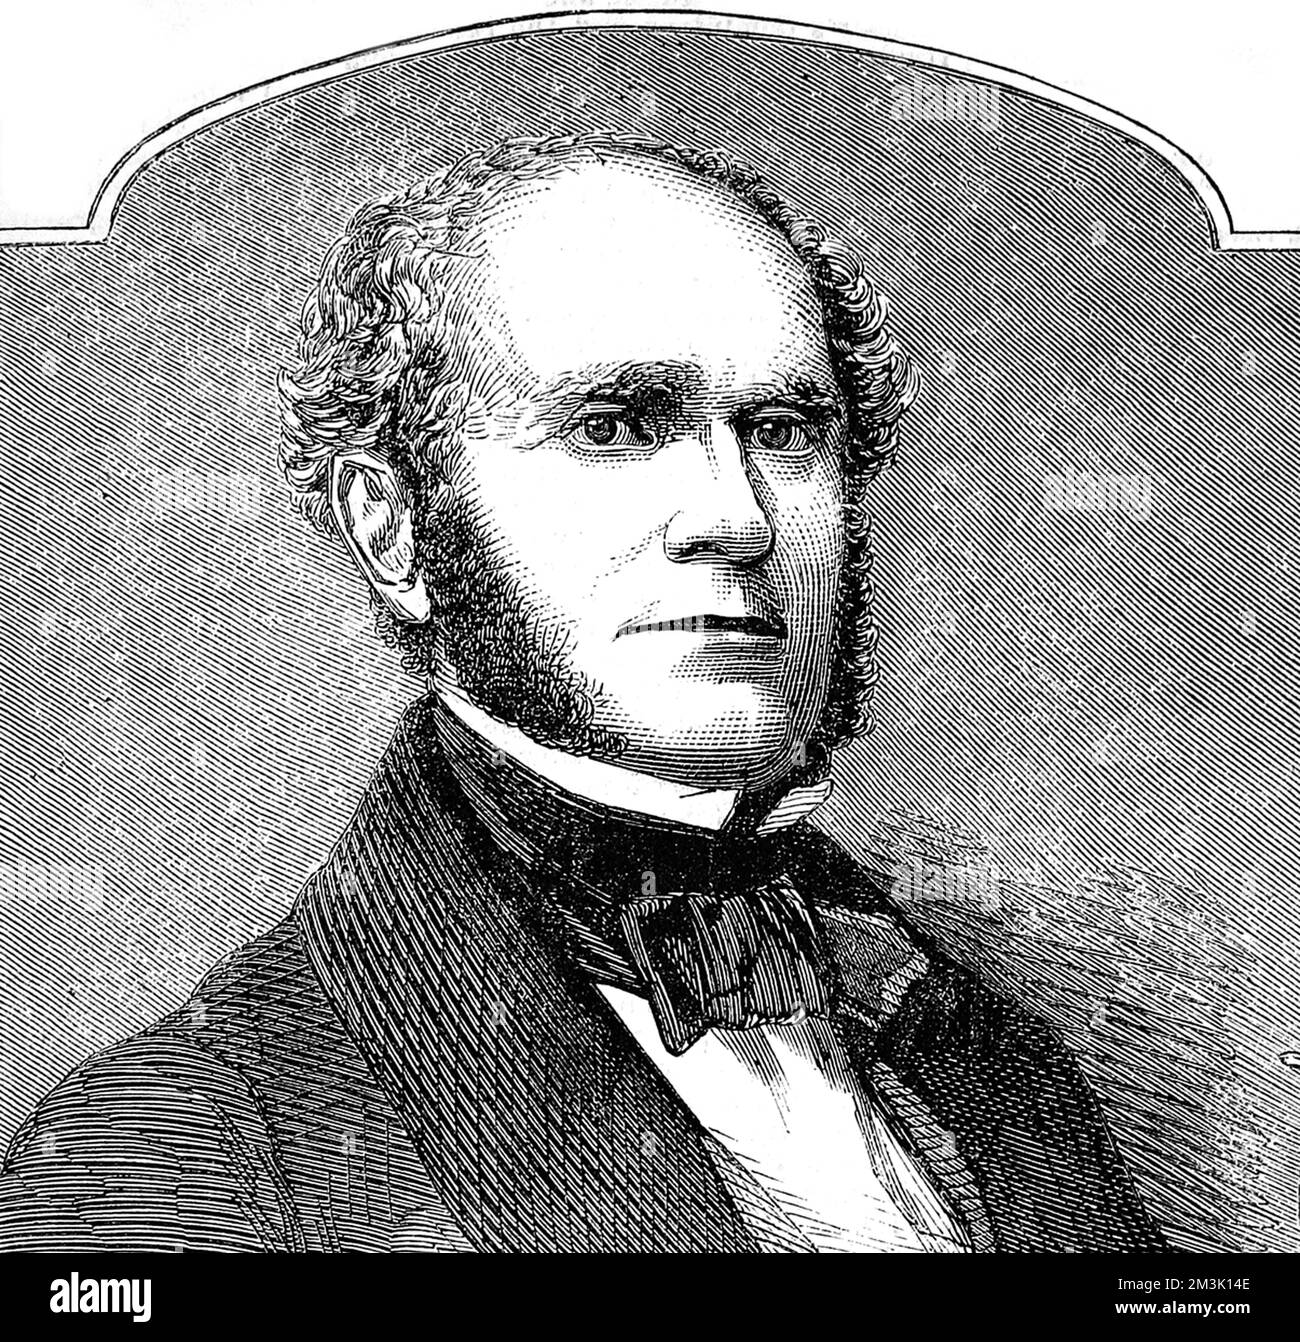 Portrait of Fitzgreene Halleck, a poet first published in 1819, visited England in 1822 and wrote 'Alnwick Castle' as a reminiscence.     Date: 1858 Stock Photo